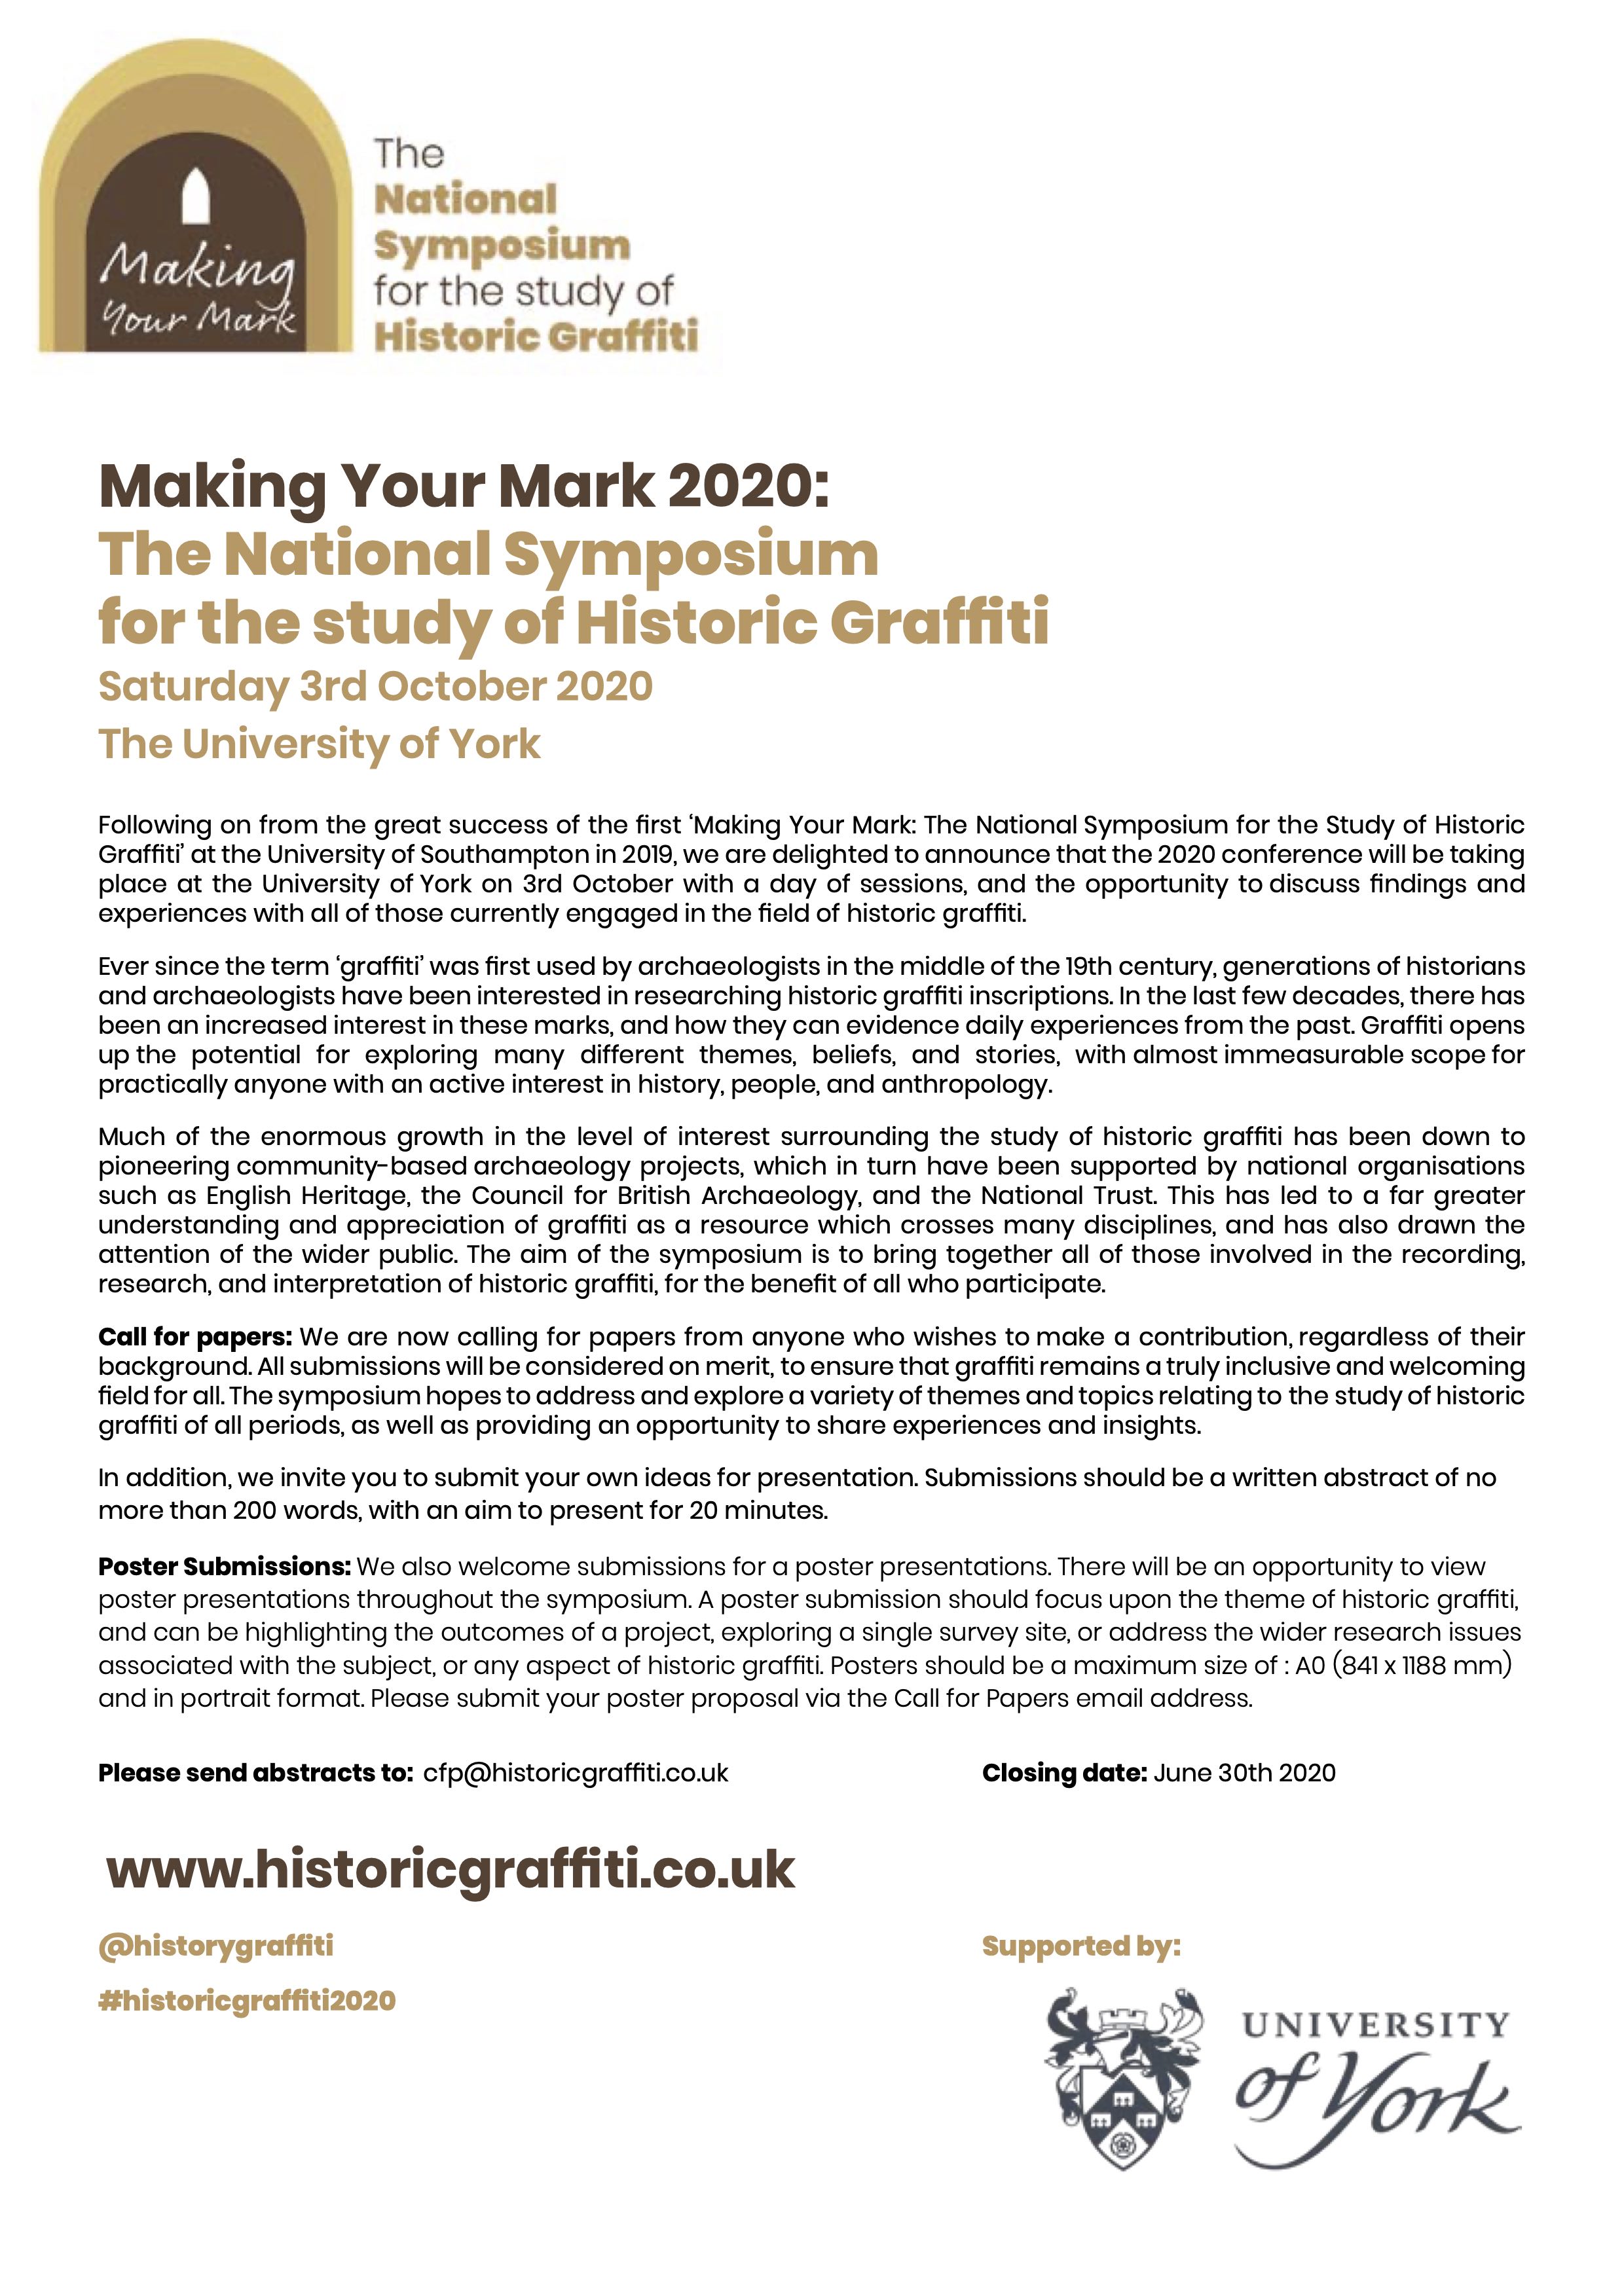 Poster advertising Making Your Mark conference